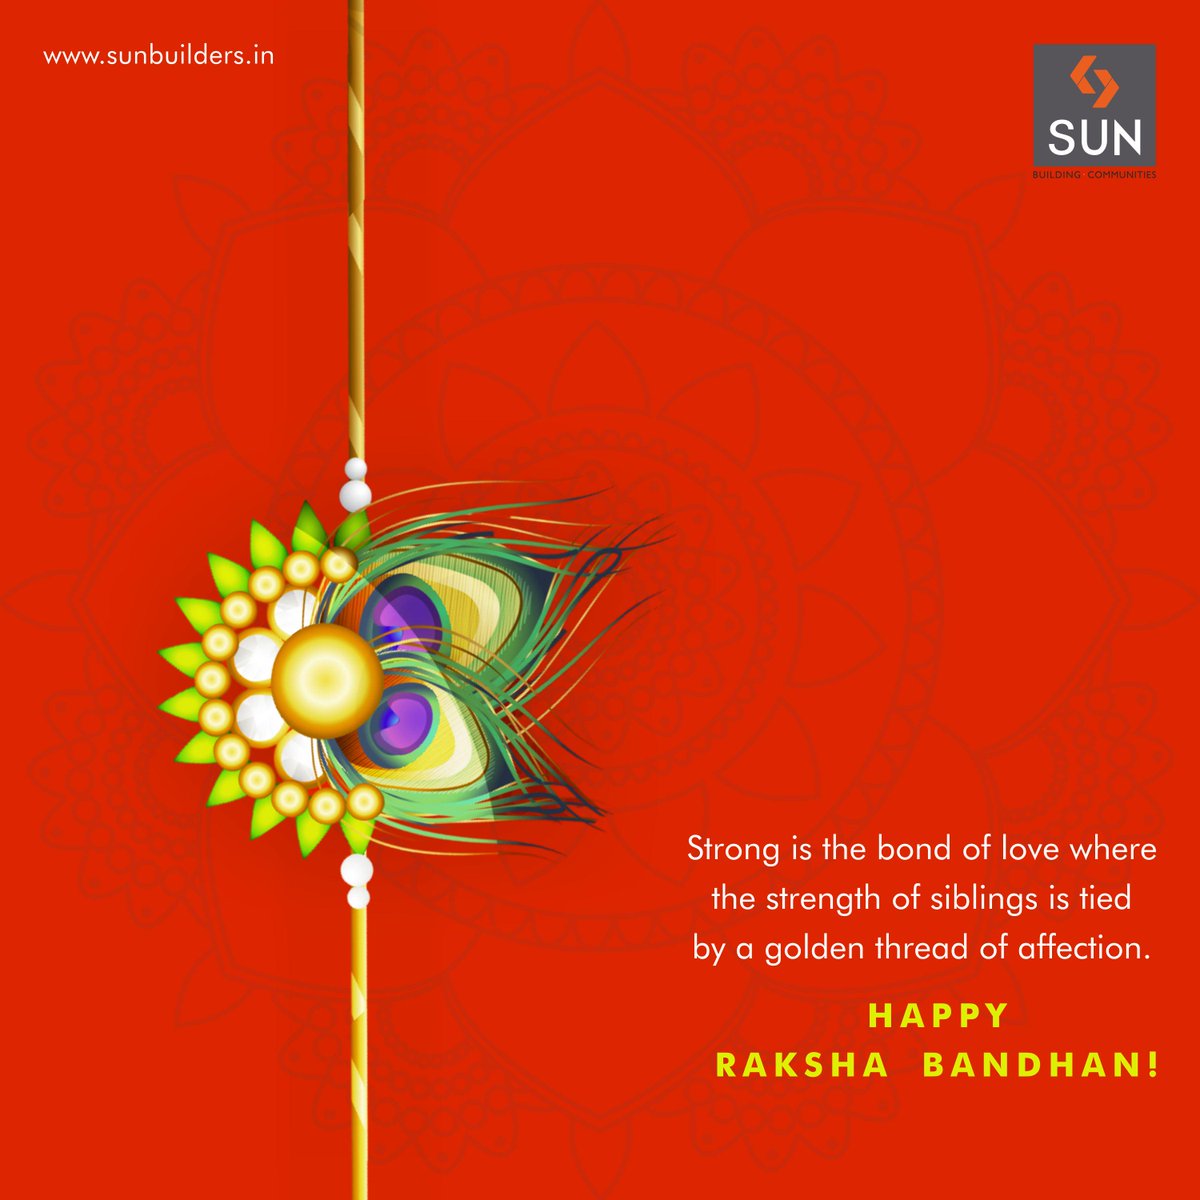 Sun Builders Group wishes all brothers & sisters a very Happy Raksha Bandhan today! http://t.co/oZ0F1FS7xF